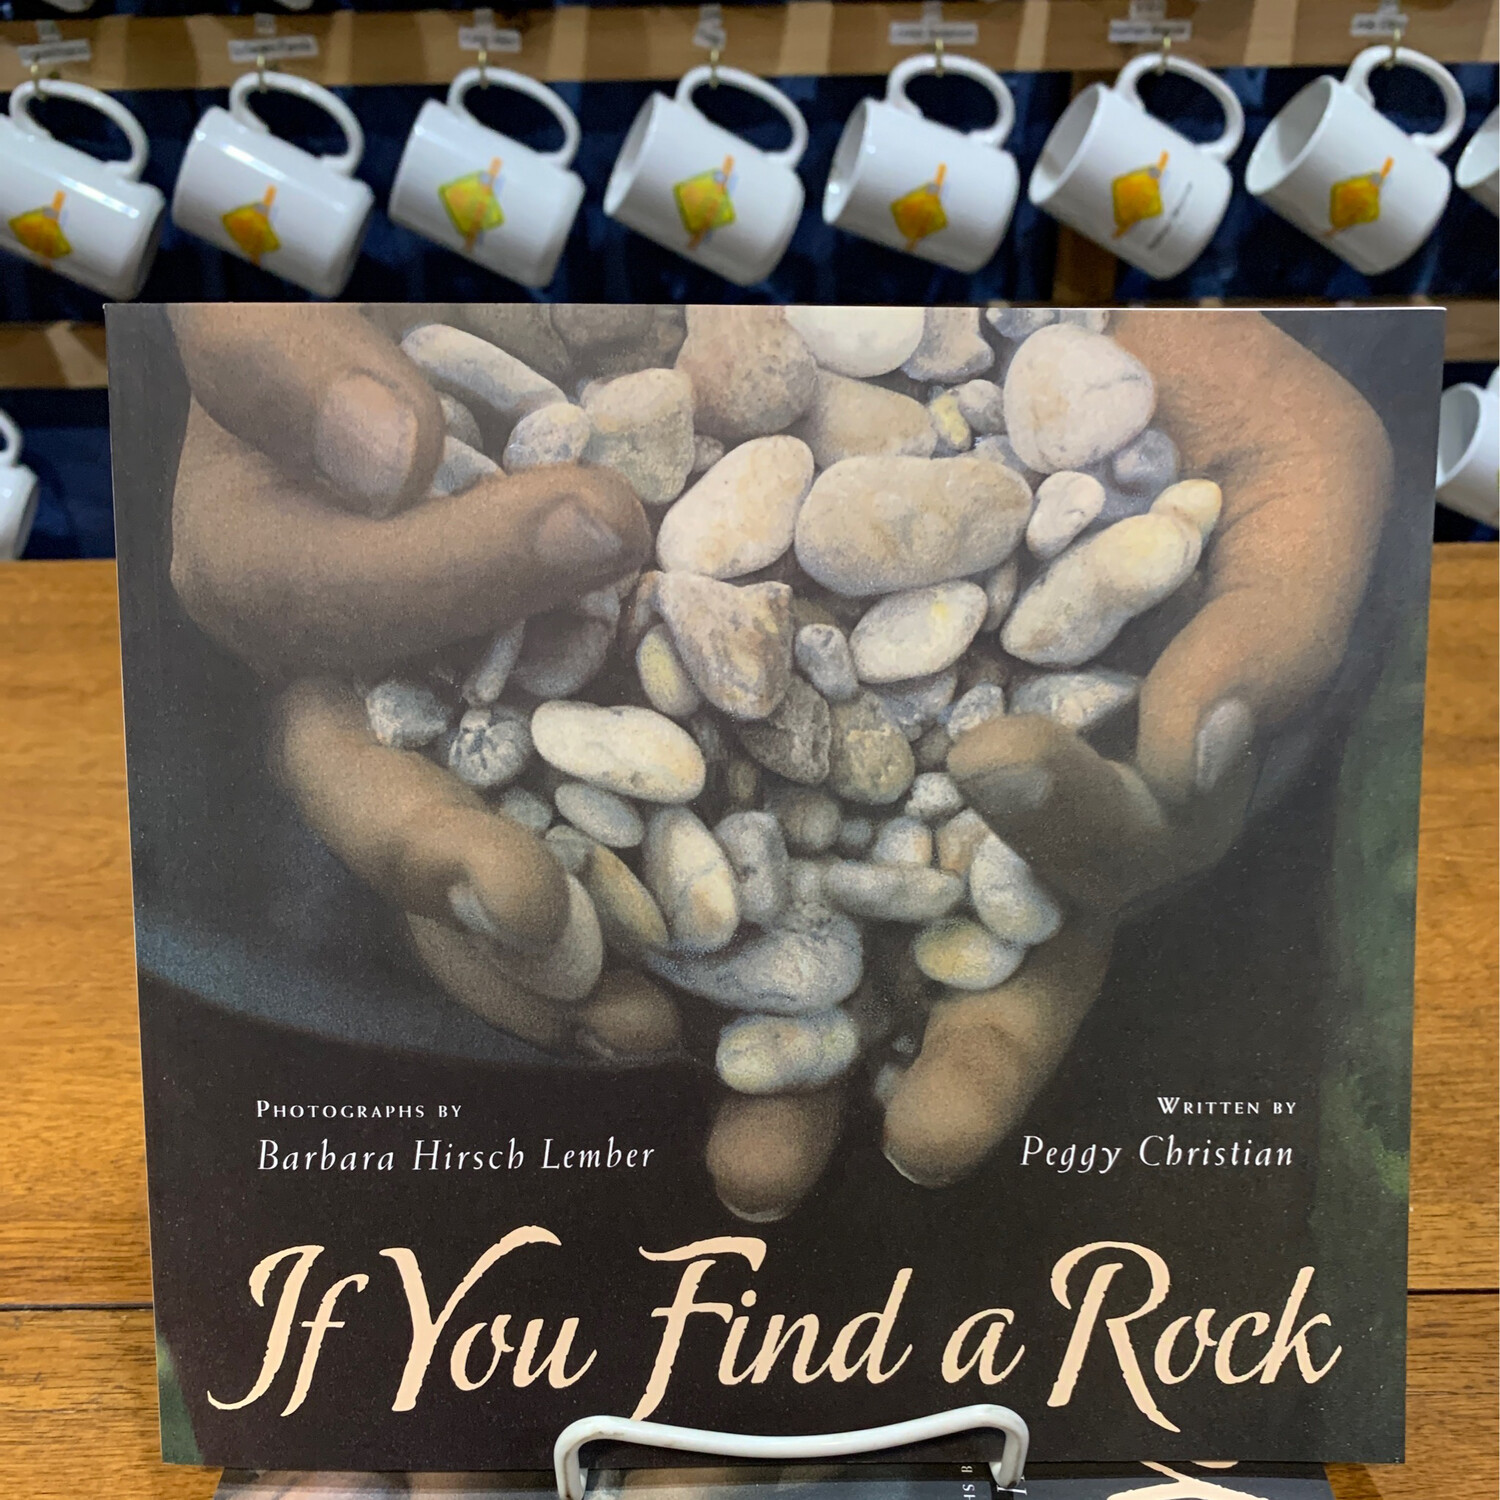 If You Find A Rock by Peggy Christian